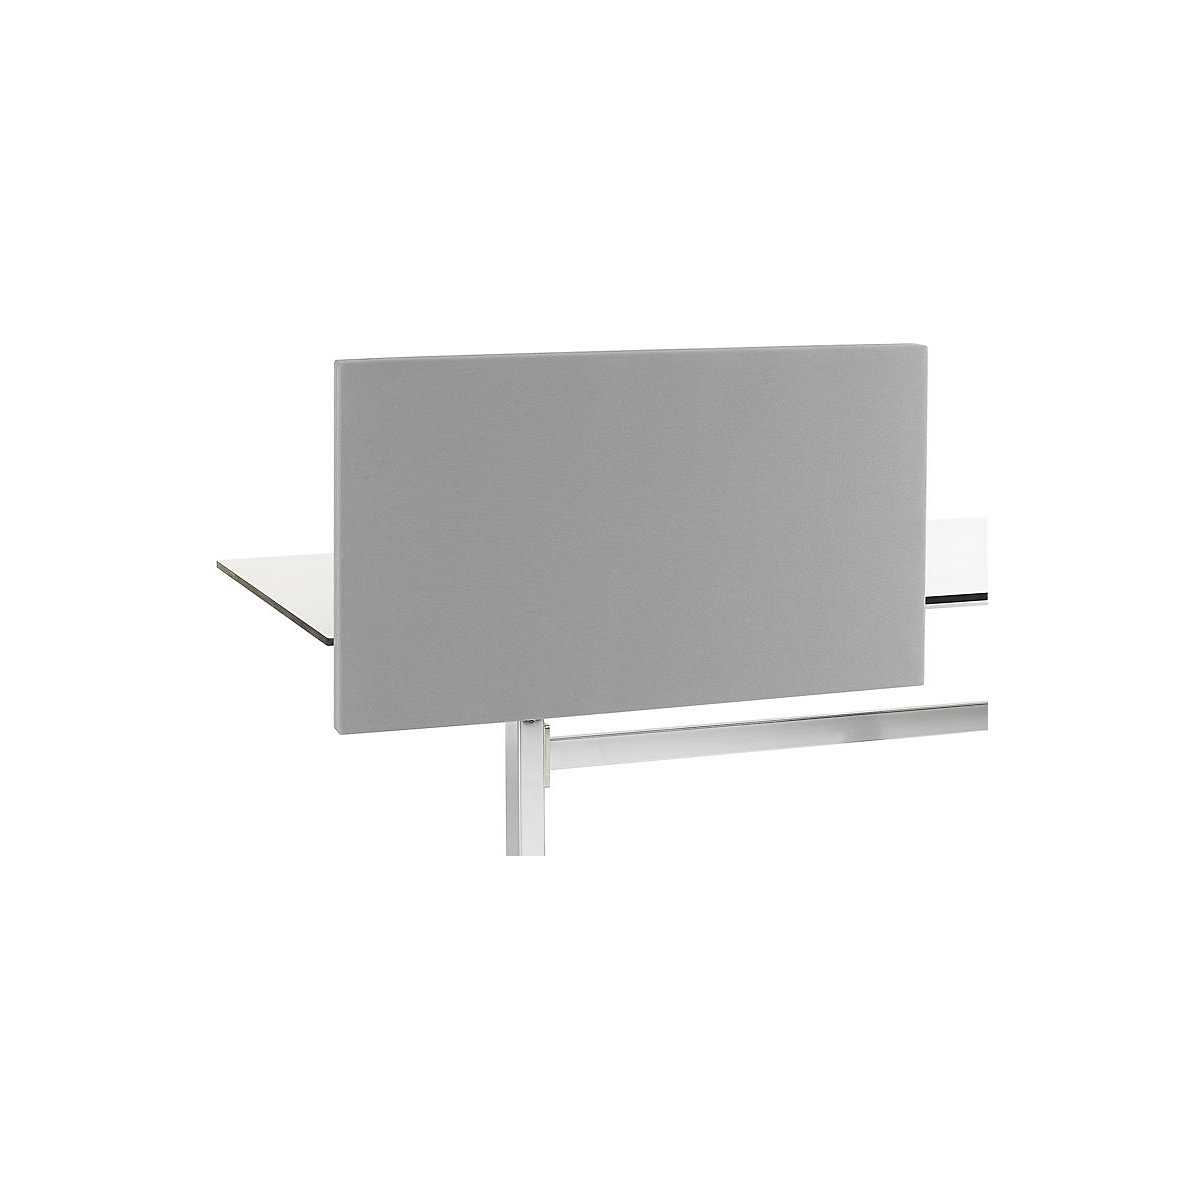 Standard acoustic desk partition with straight corners